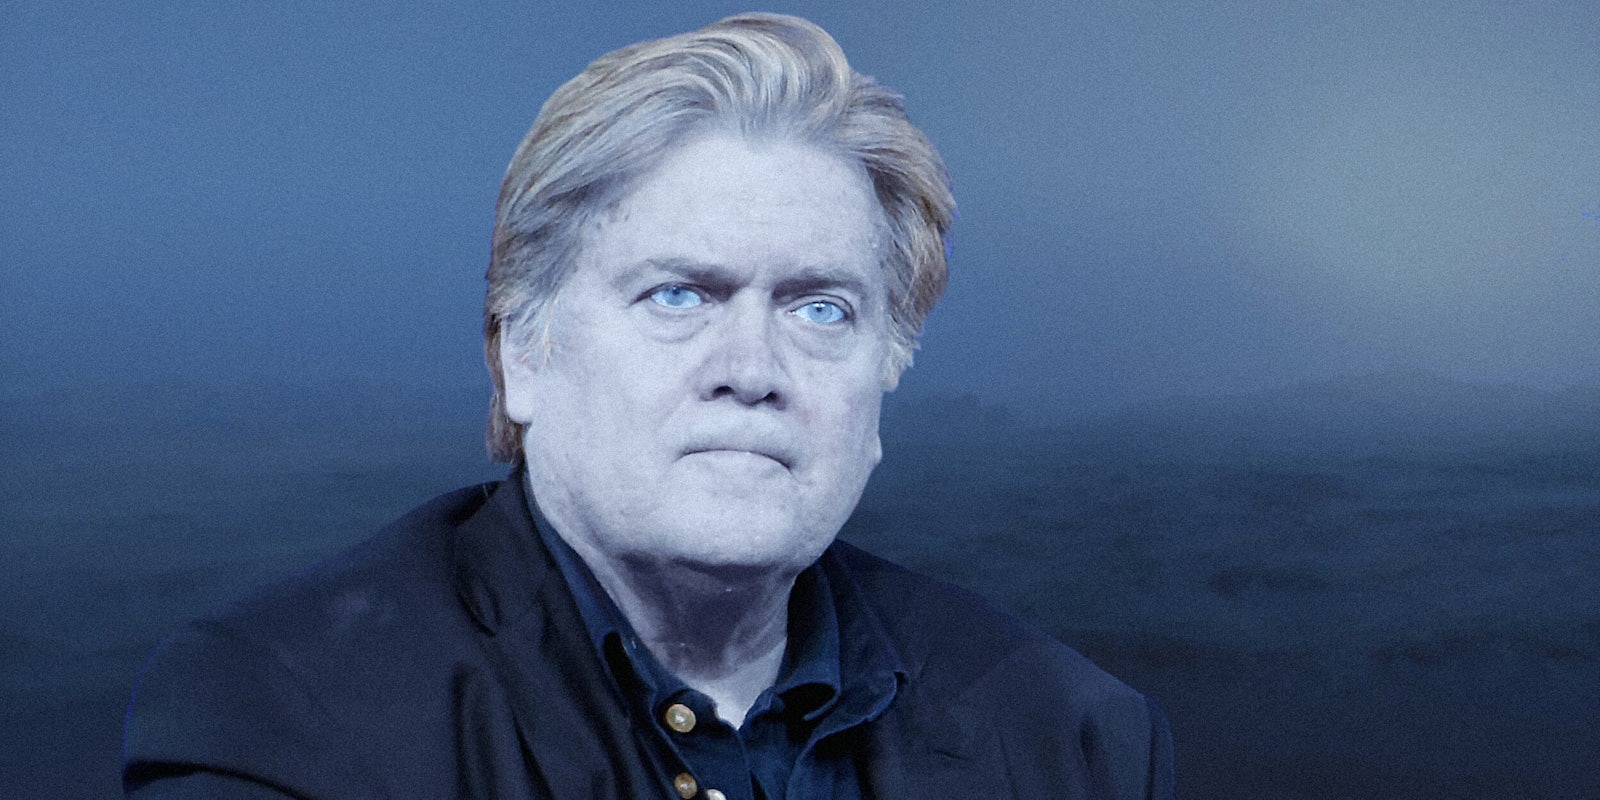 Steve Bannon as a Wight Walker from Game of Thrones